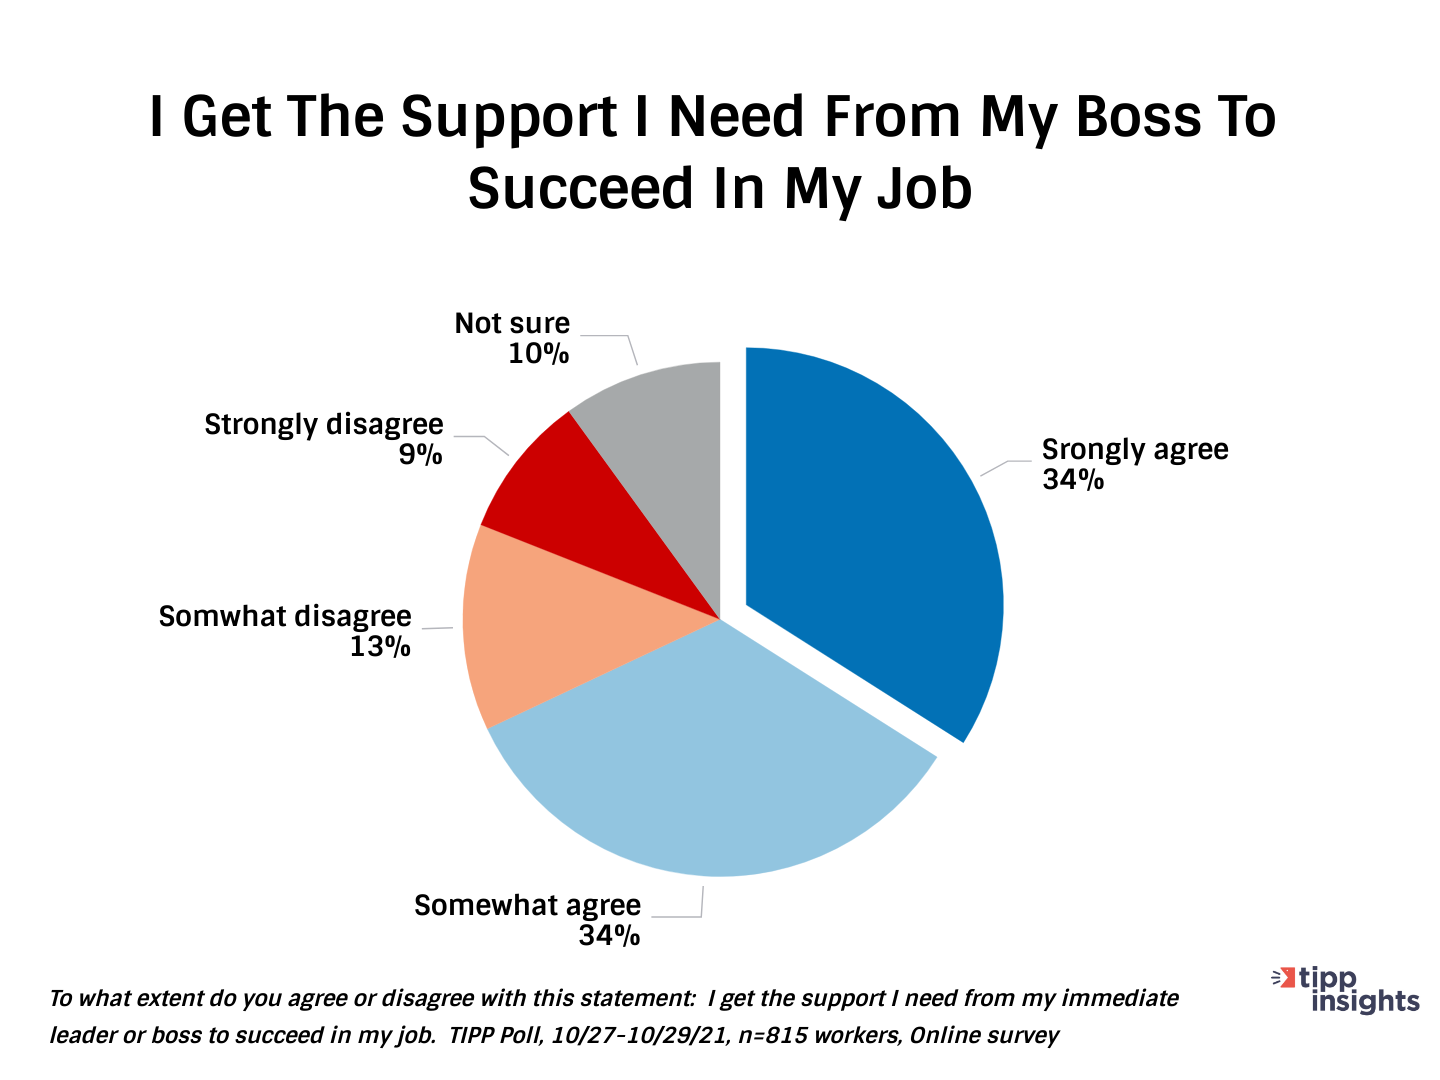 TIPP Poll Results: Do workers get the support they need from their immediate leader or boss to succeed in their job?